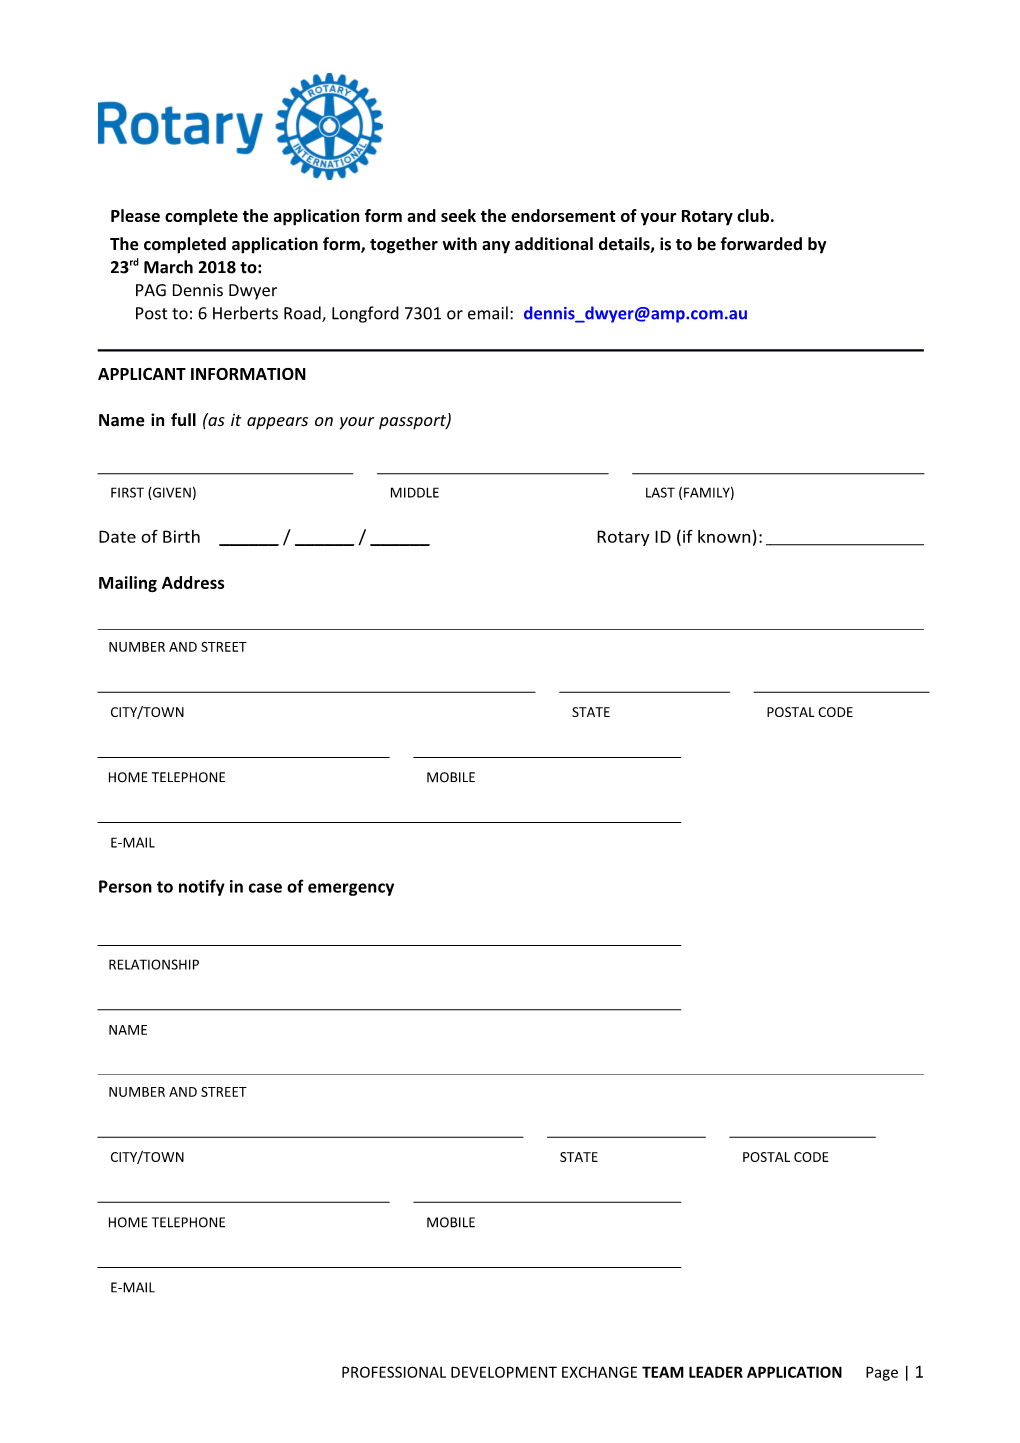 Please Complete the Application Form and Seek the Endorsement of Your Rotary Club